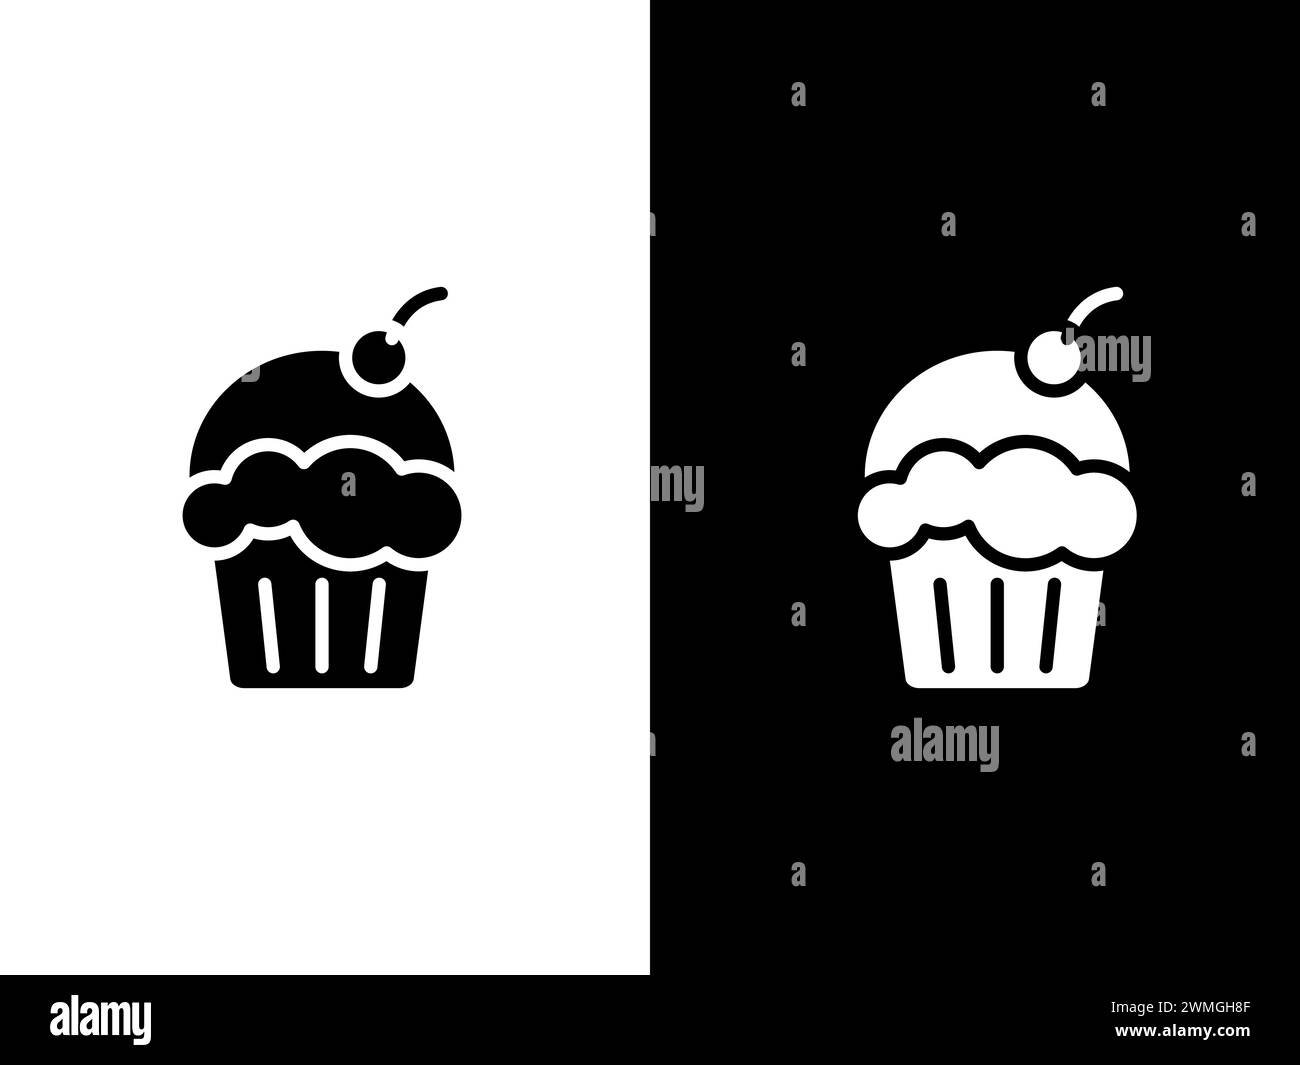 Art illustration design concpet icon black white logo isolated symbol of cup cake Stock Vector